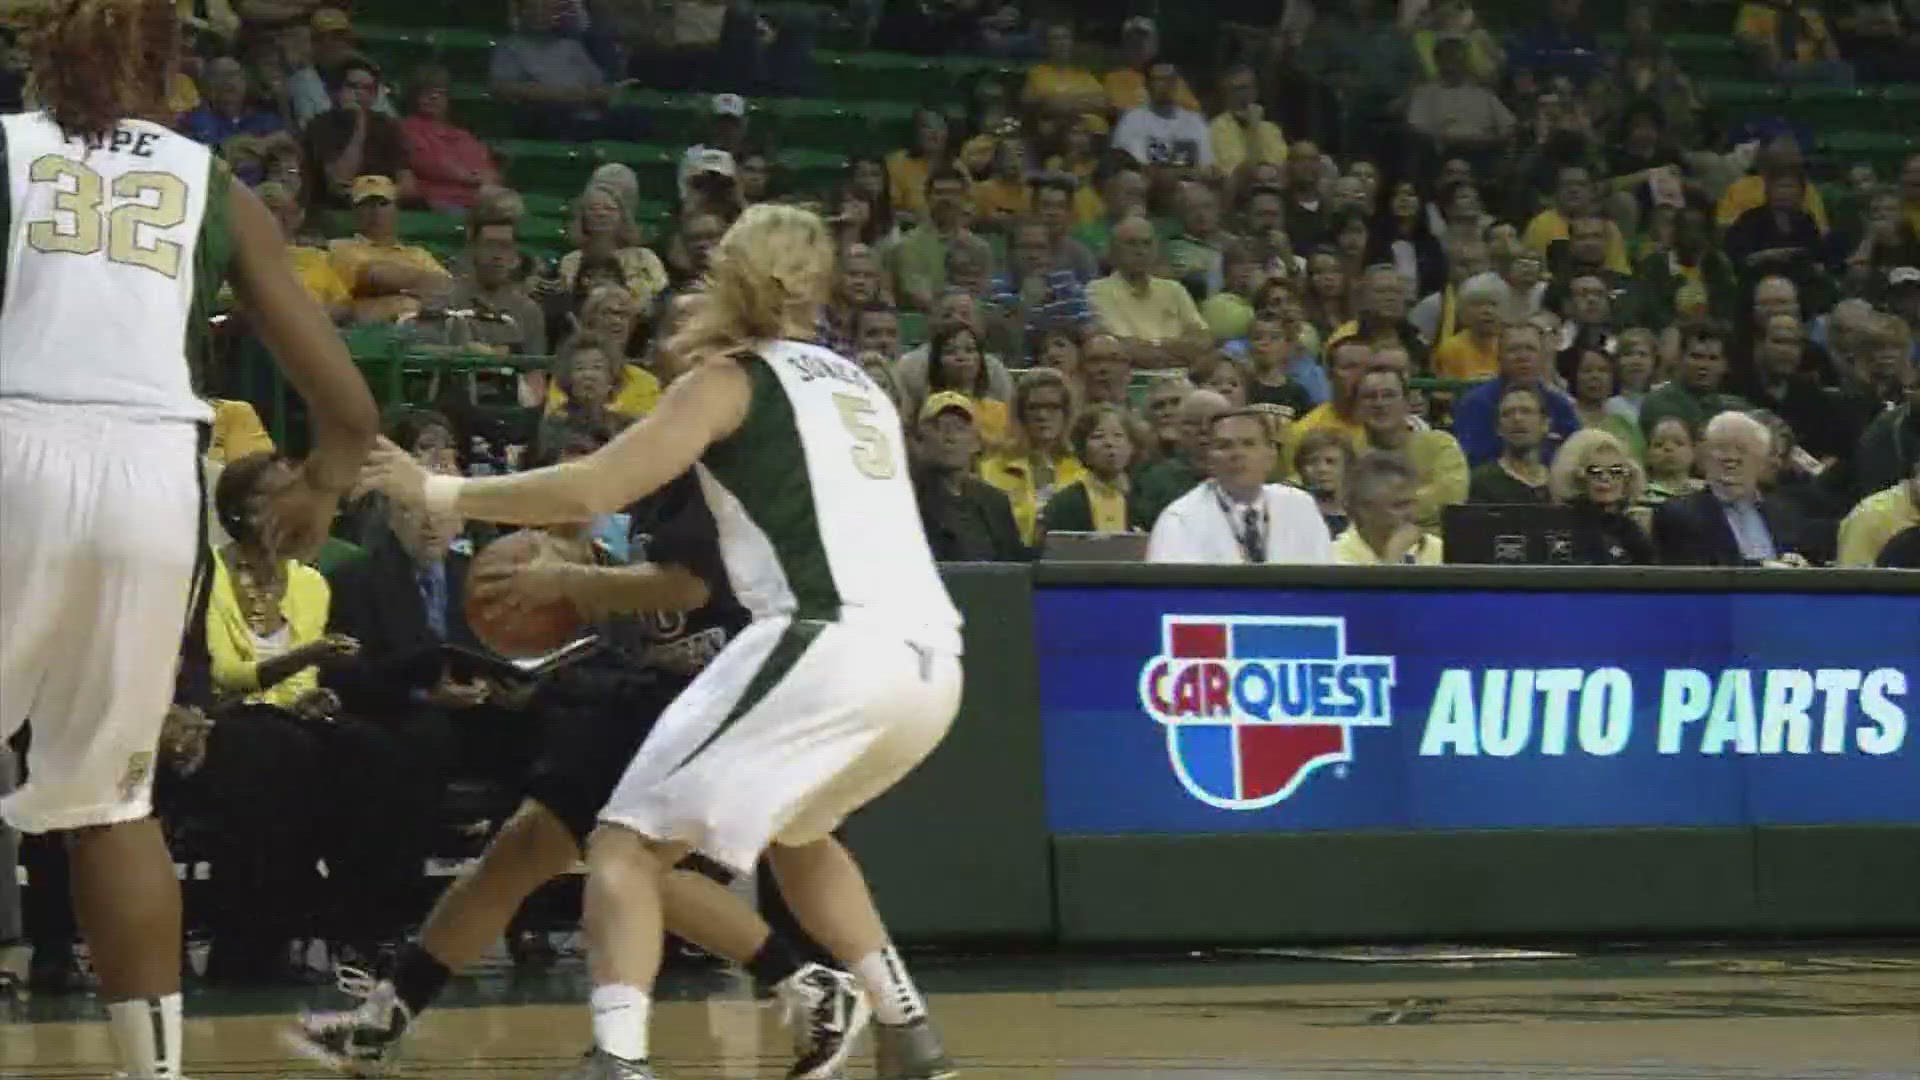 The Bears will retire Griner's No. 42 jersey during their game against Texas Tech on Feb. 18.